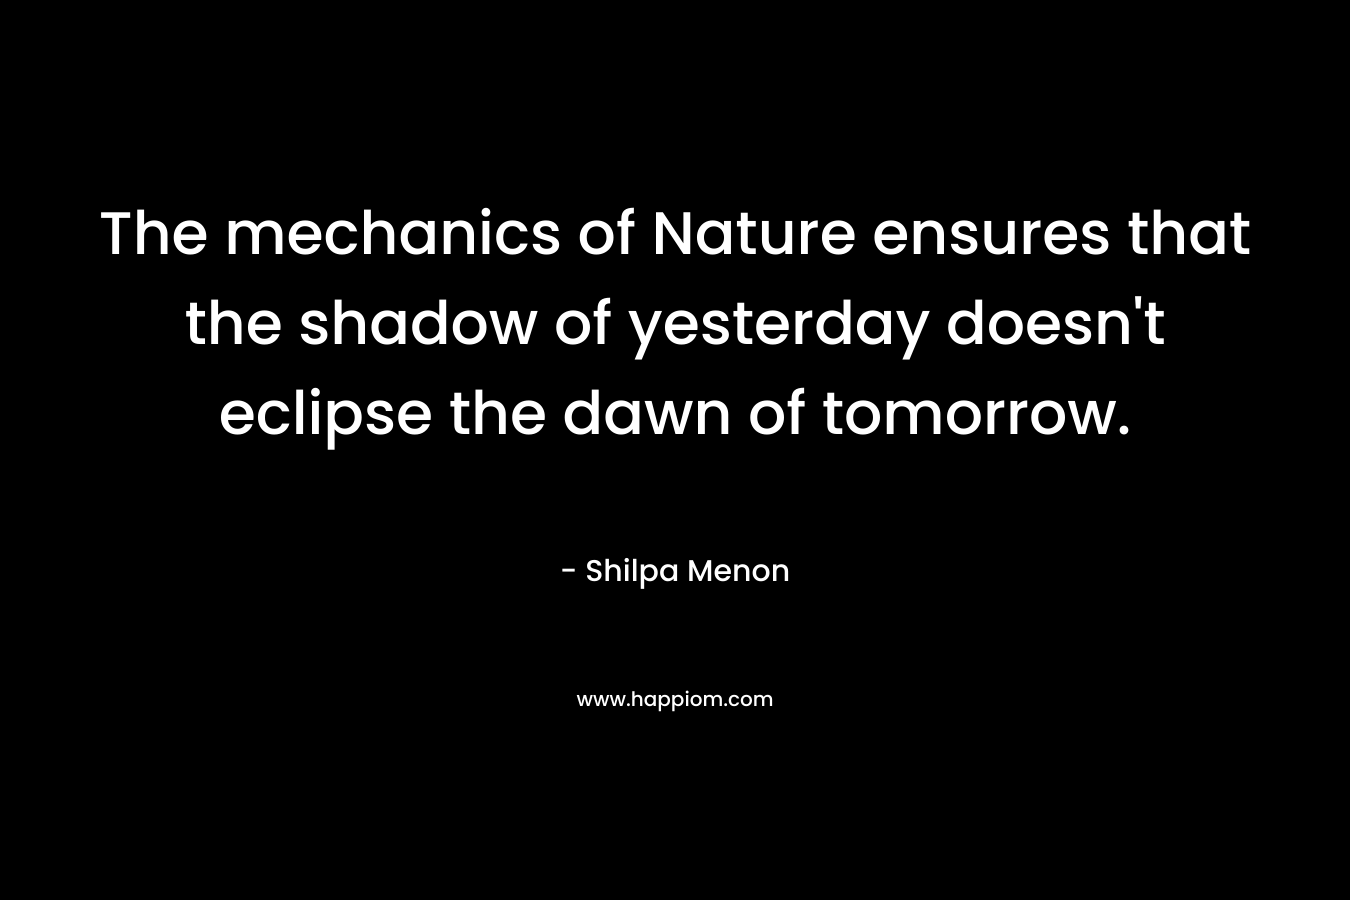 The mechanics of Nature ensures that the shadow of yesterday doesn't eclipse the dawn of tomorrow.